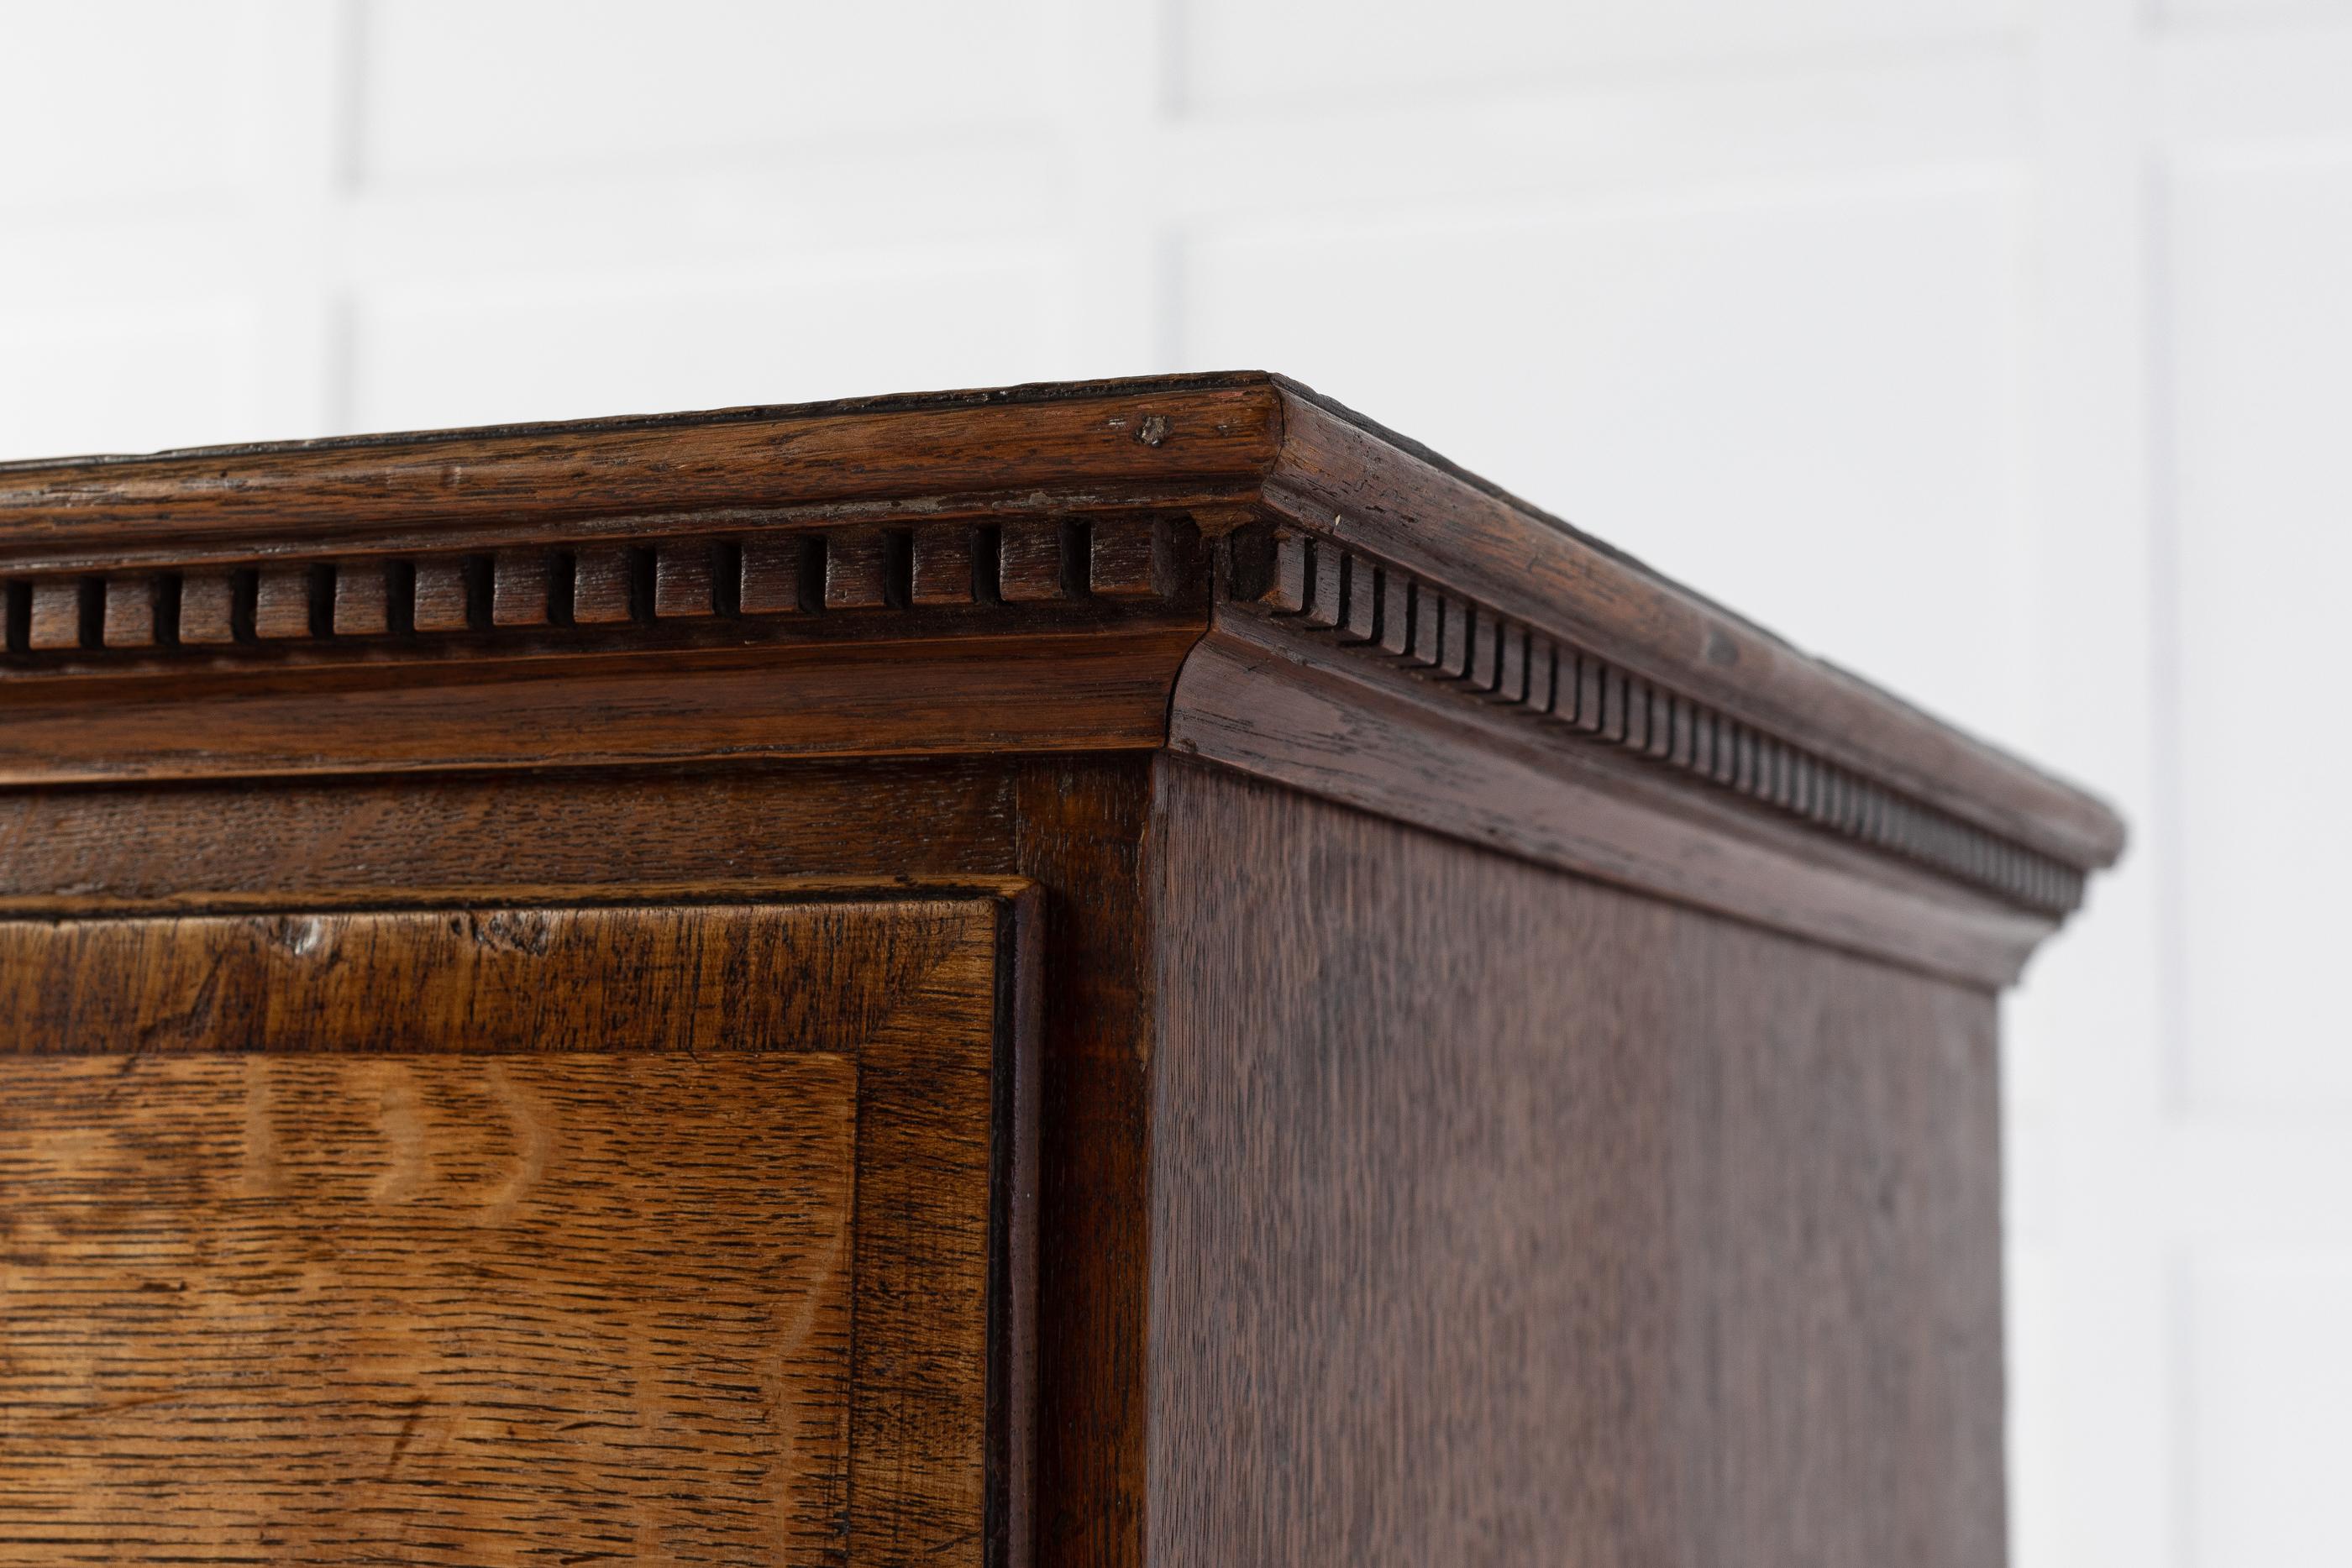 18th century, George III chest of drawers having a dentil moulded top cornice. With two small drawers over four long graduating drawers. Each drawer has choice cuts of oak with oak cross banding and original handles. Standing on its original shaped